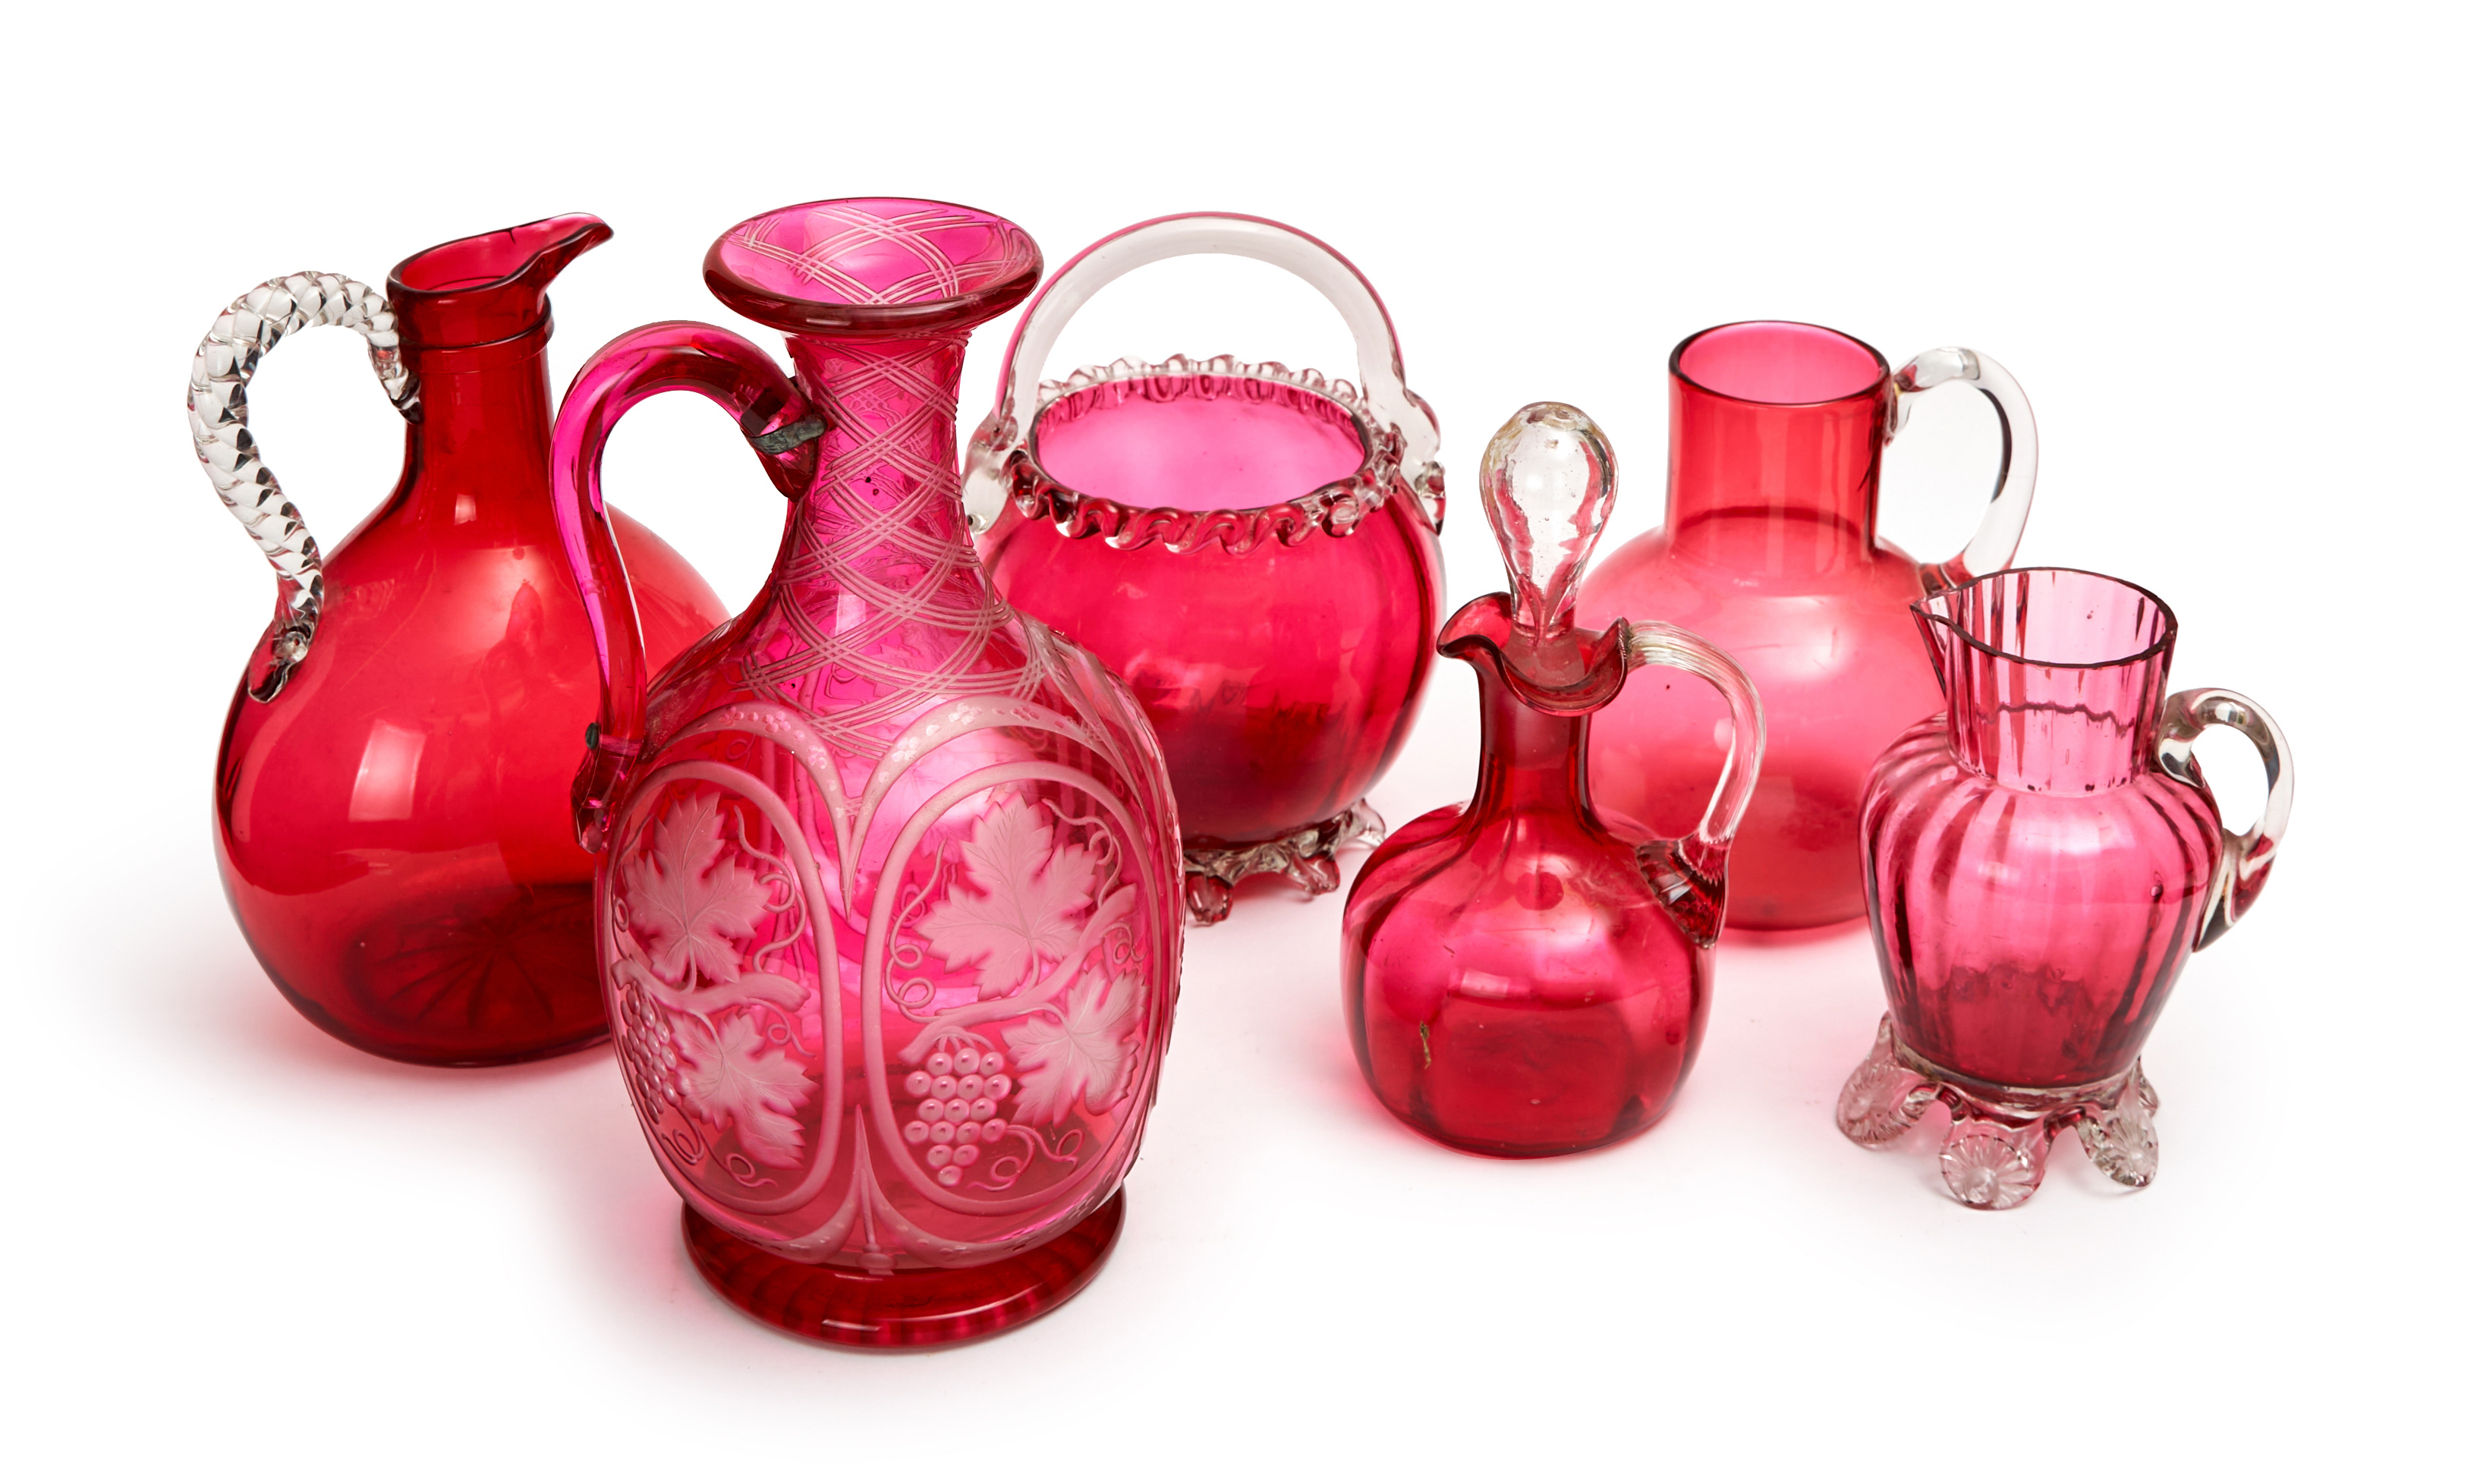 ASSORTMENT OF CRANBERRY GLASS OBJECTS, COMPROMISING EWERS & A BASKET - Image 2 of 2